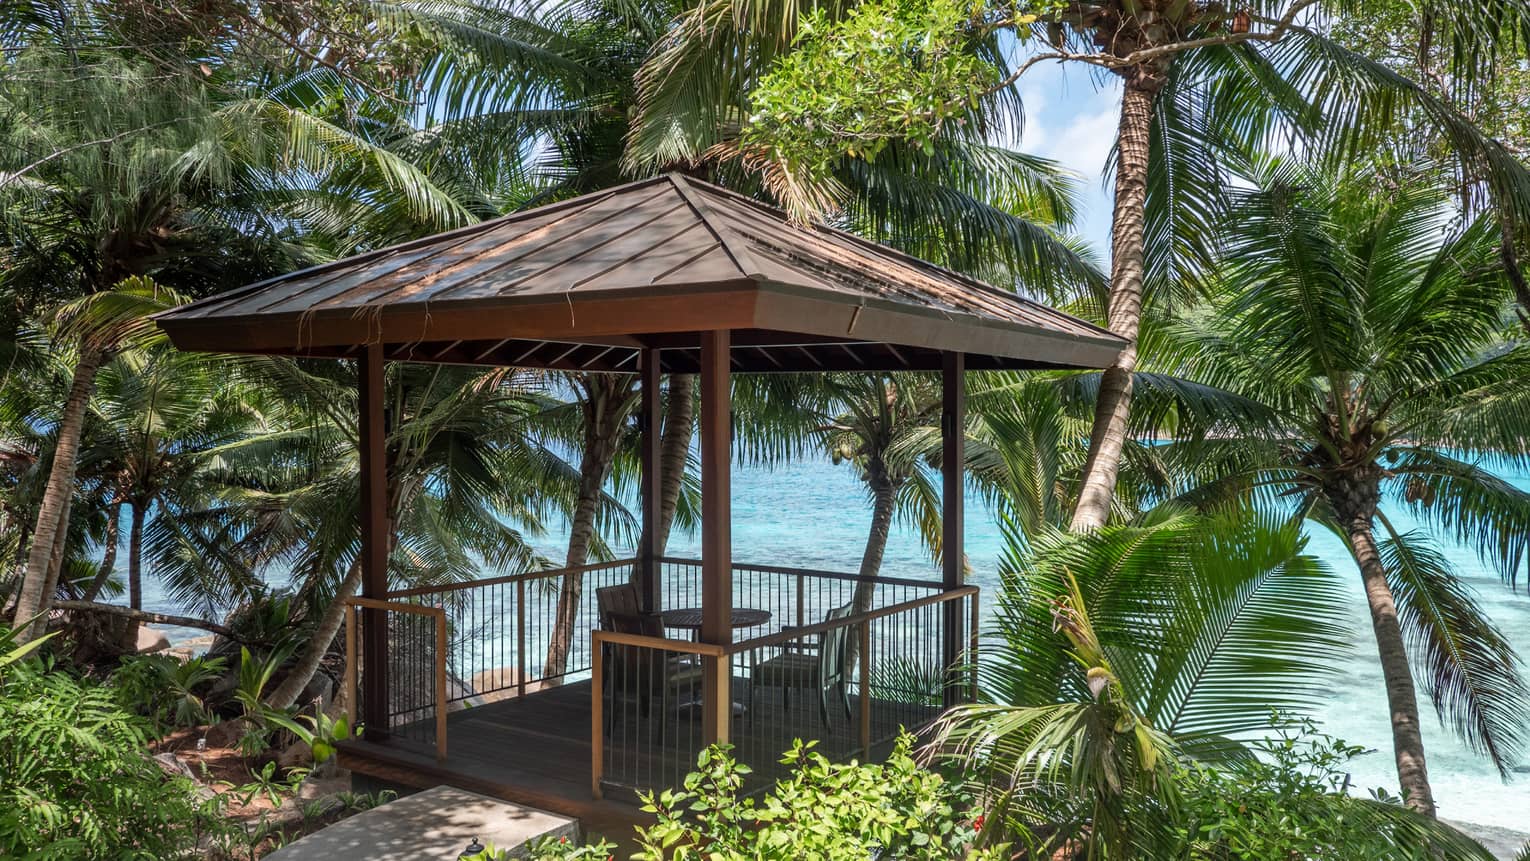 Small pavilion with a table and two chairs at a tropical point overlooking the beach